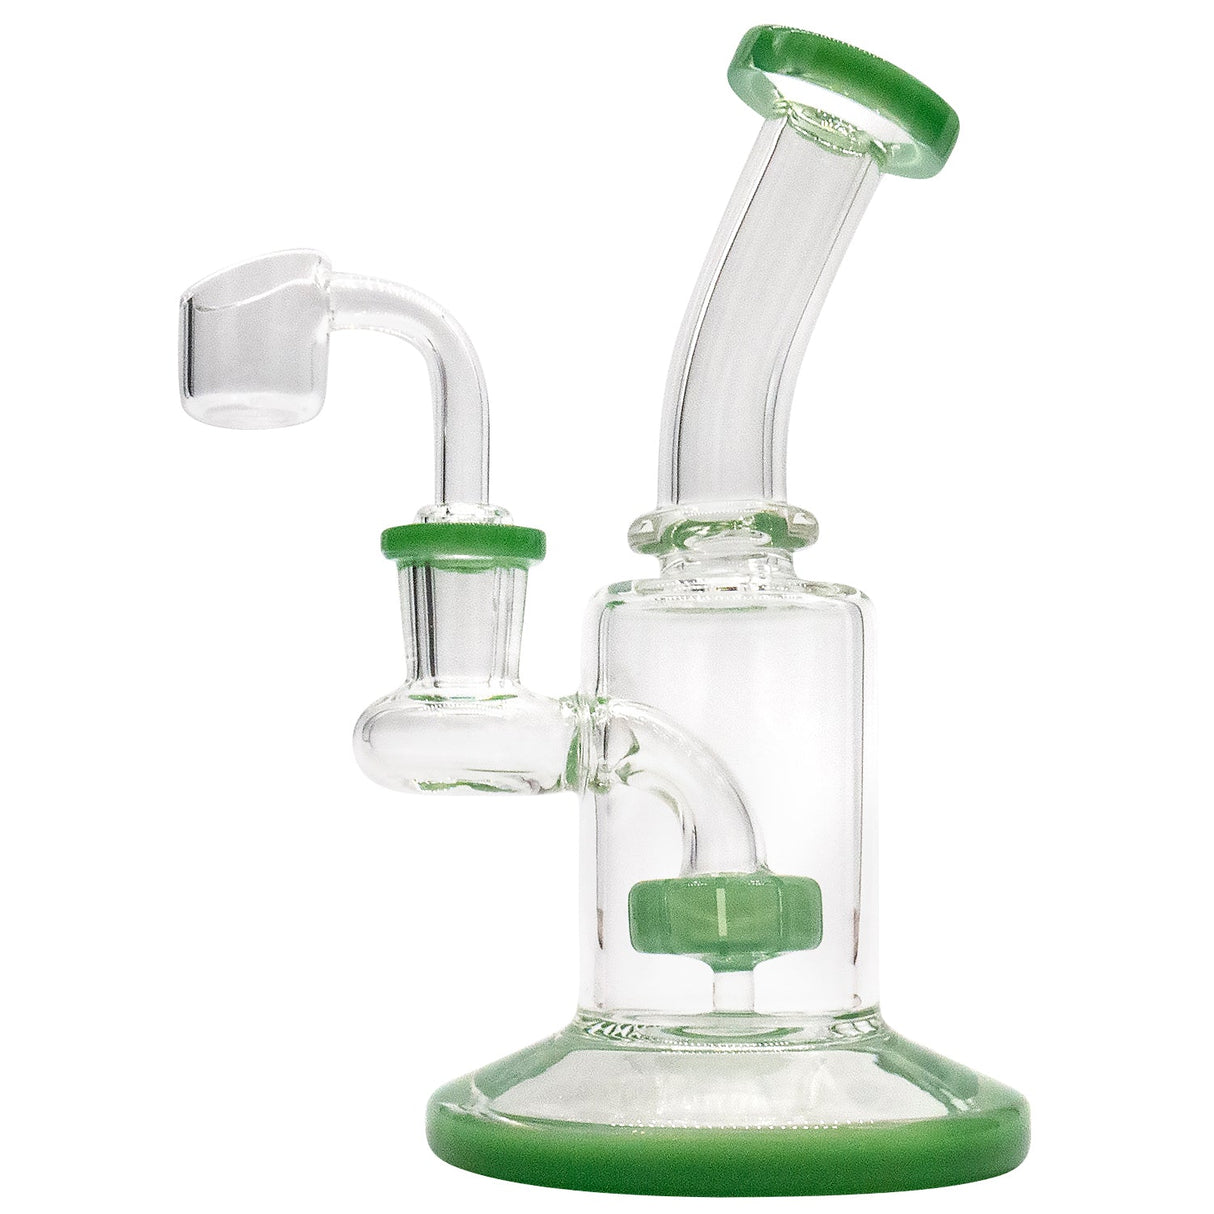 Glassic's "Spritz" 6.5" Dab Rig with green shower-head perc, 90-degree joint, and banger